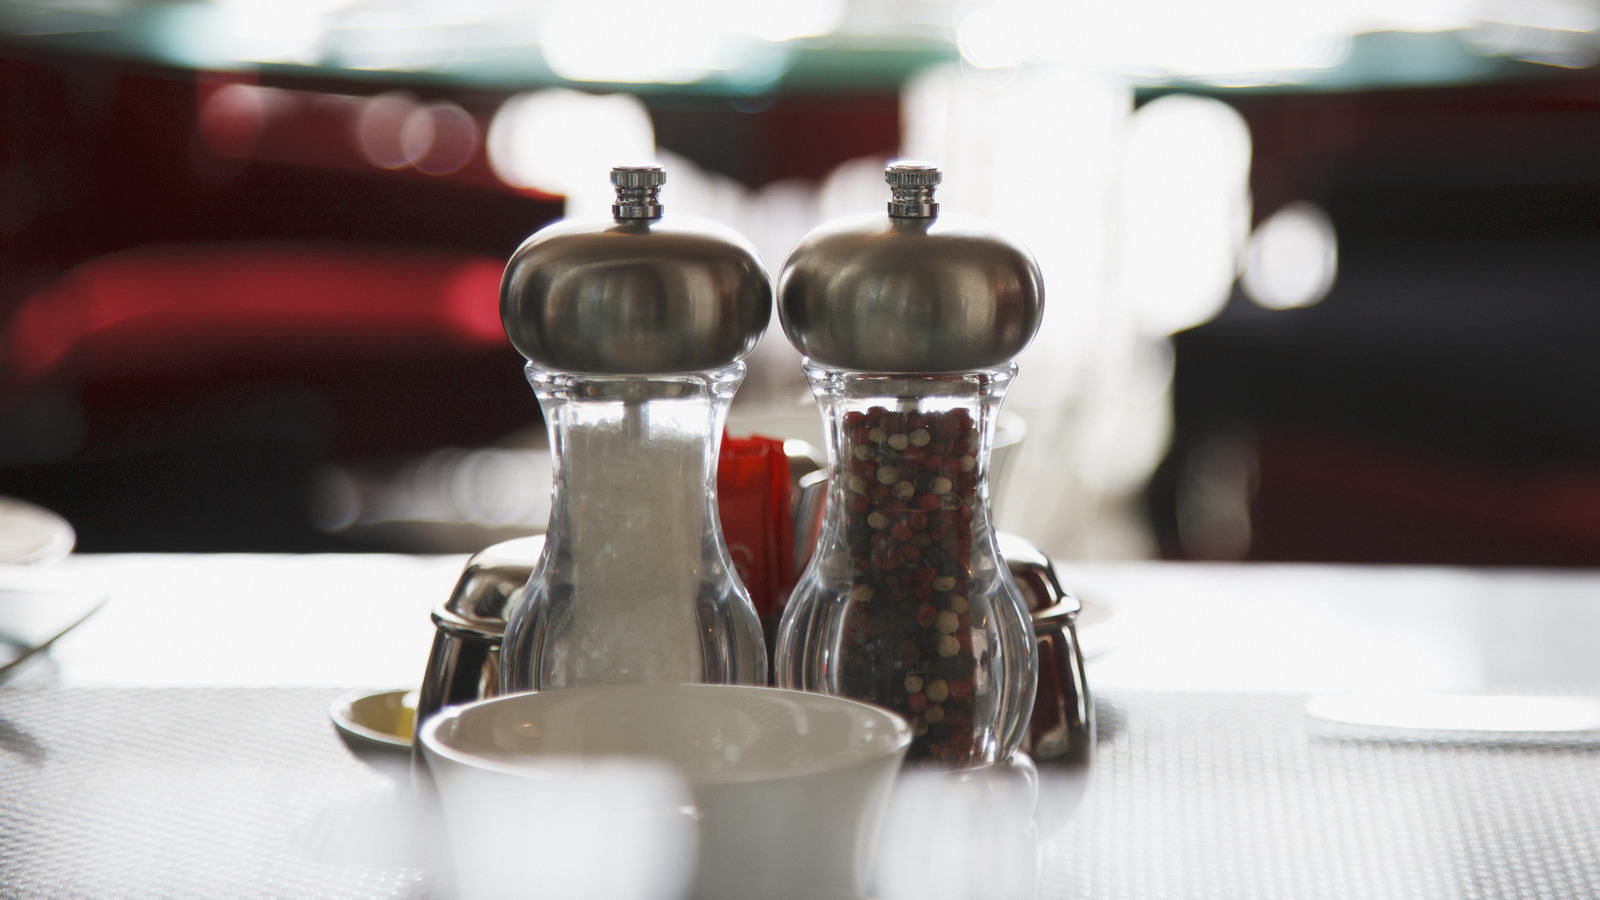 Why Do Some Restaurants Not Have Salt And Pepper Shakers?